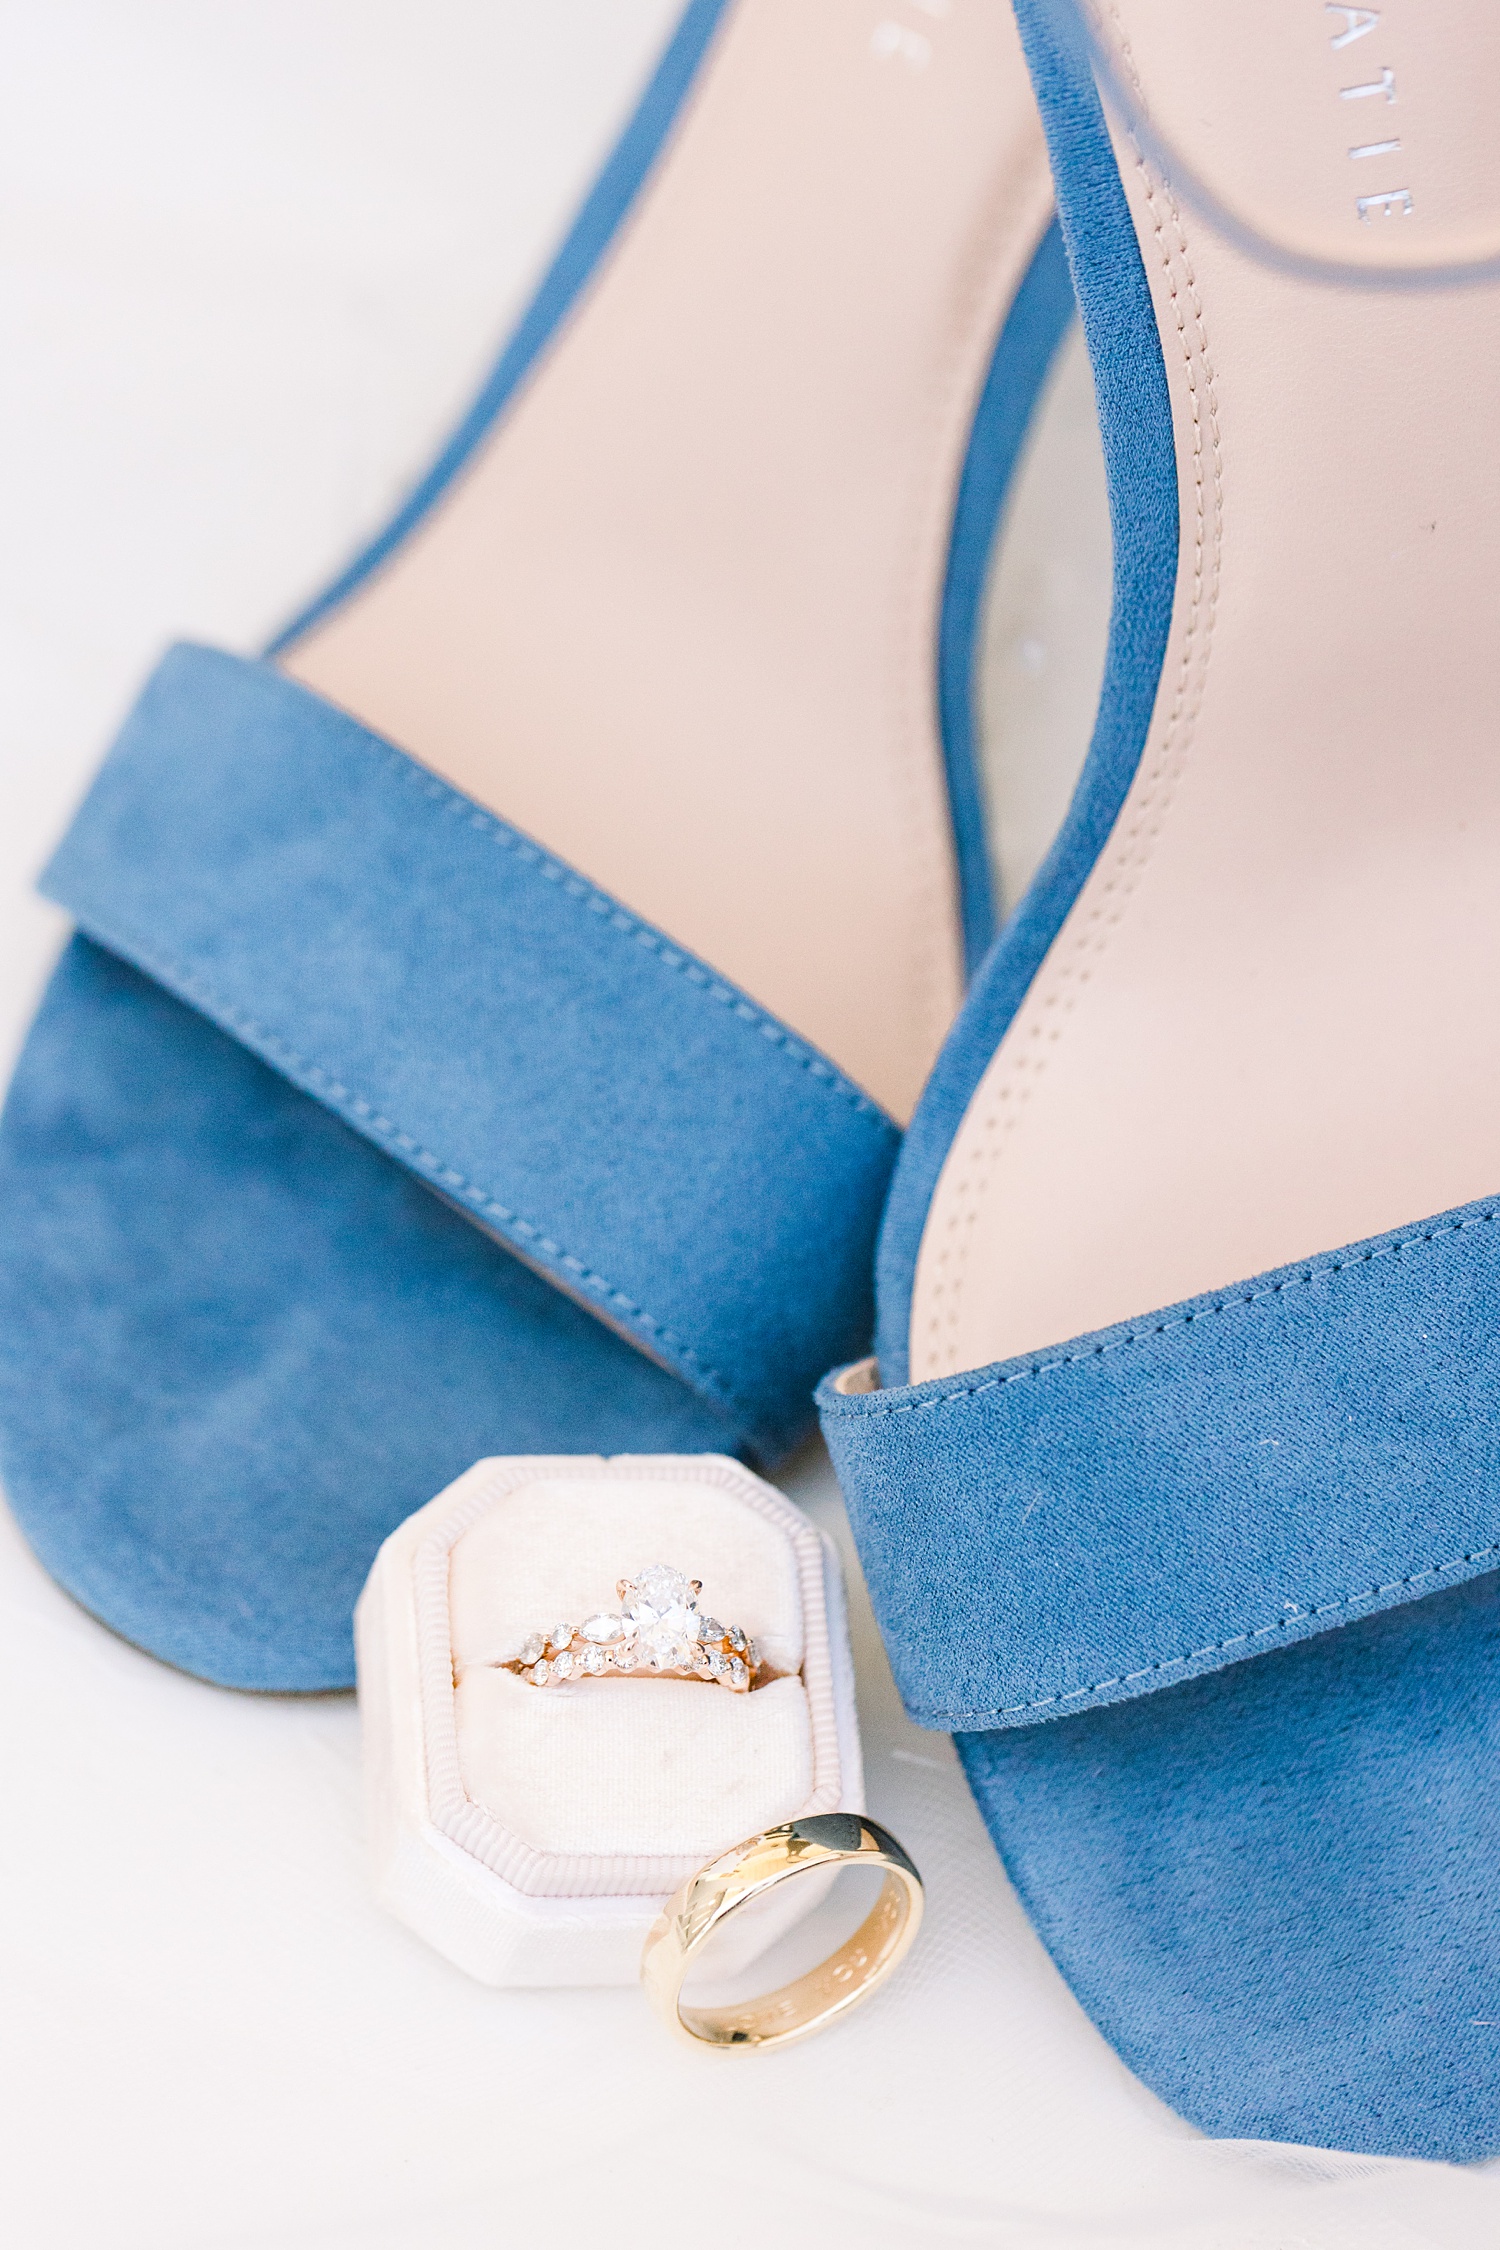 bride's blue shoes next to engagement ring